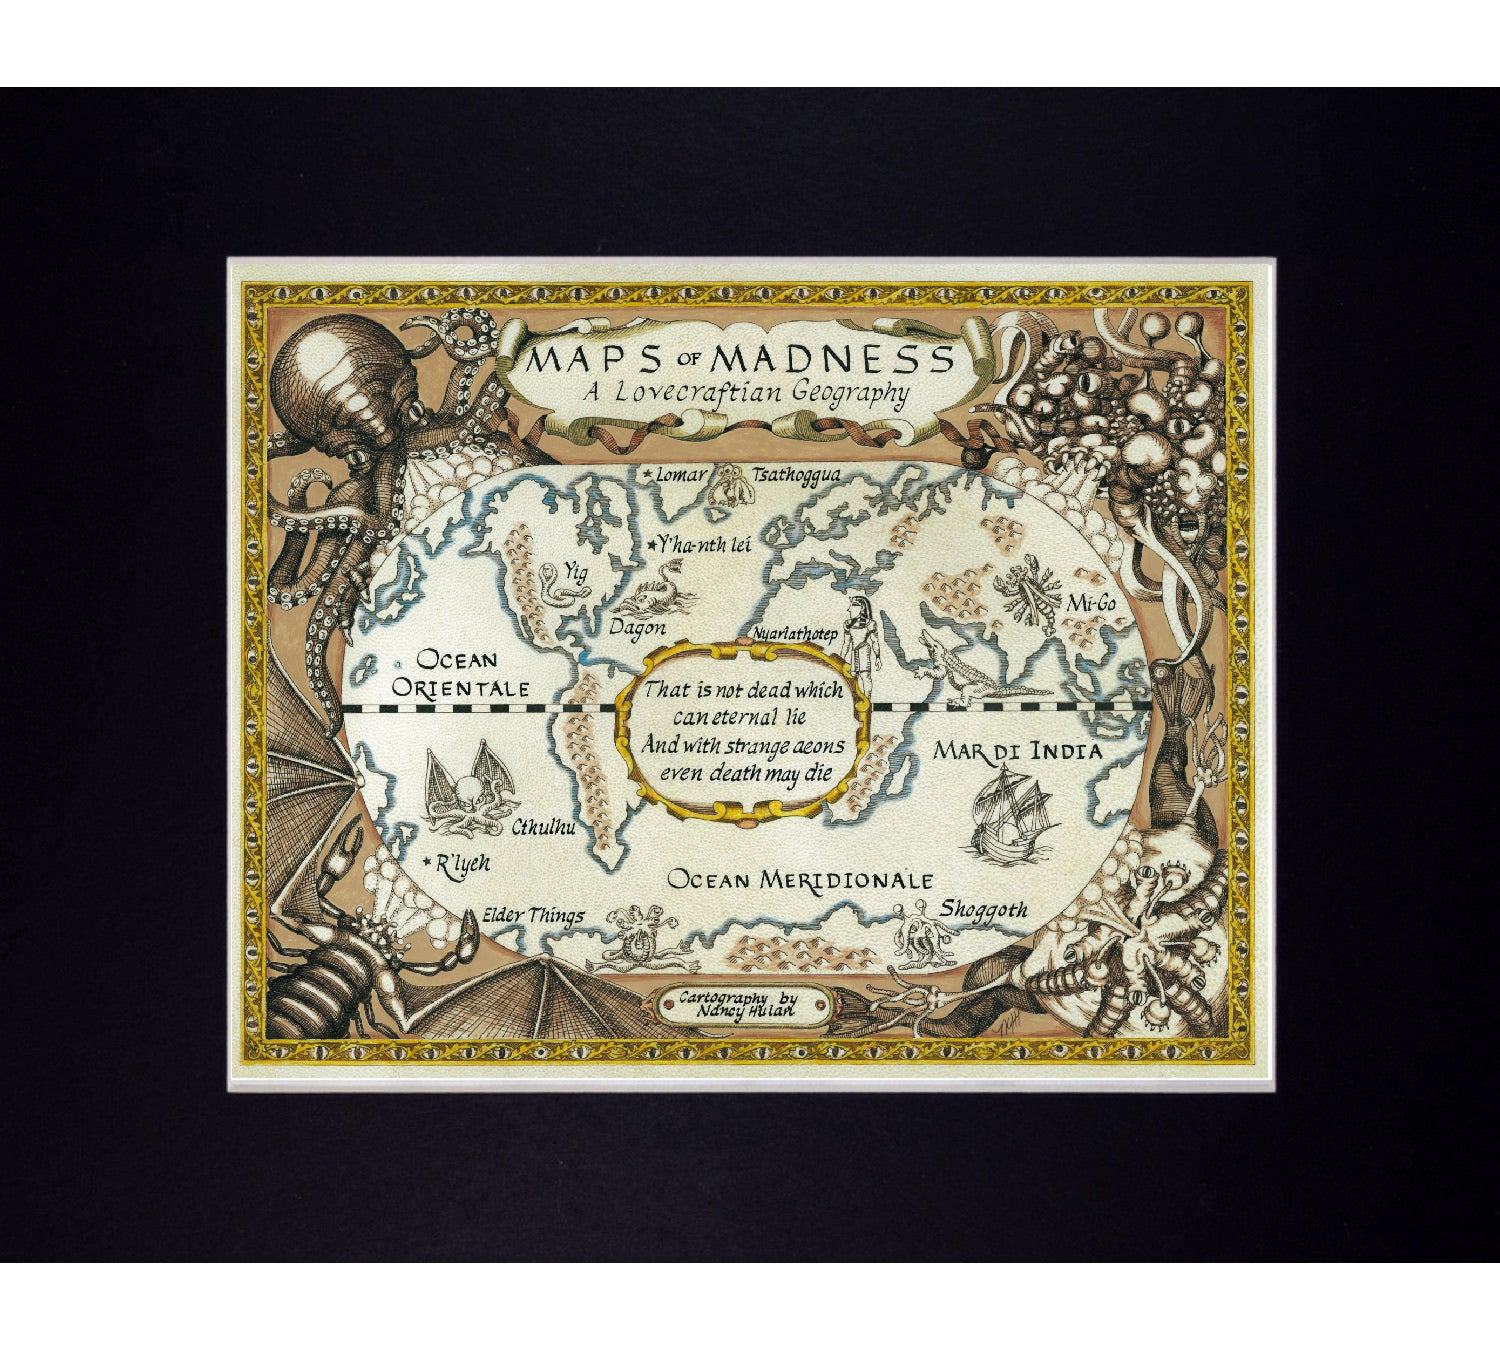 HP Lovecraft Quote and Cthulhu Map, in Antique Style, Strange Aeons - ArteOfTheBooke